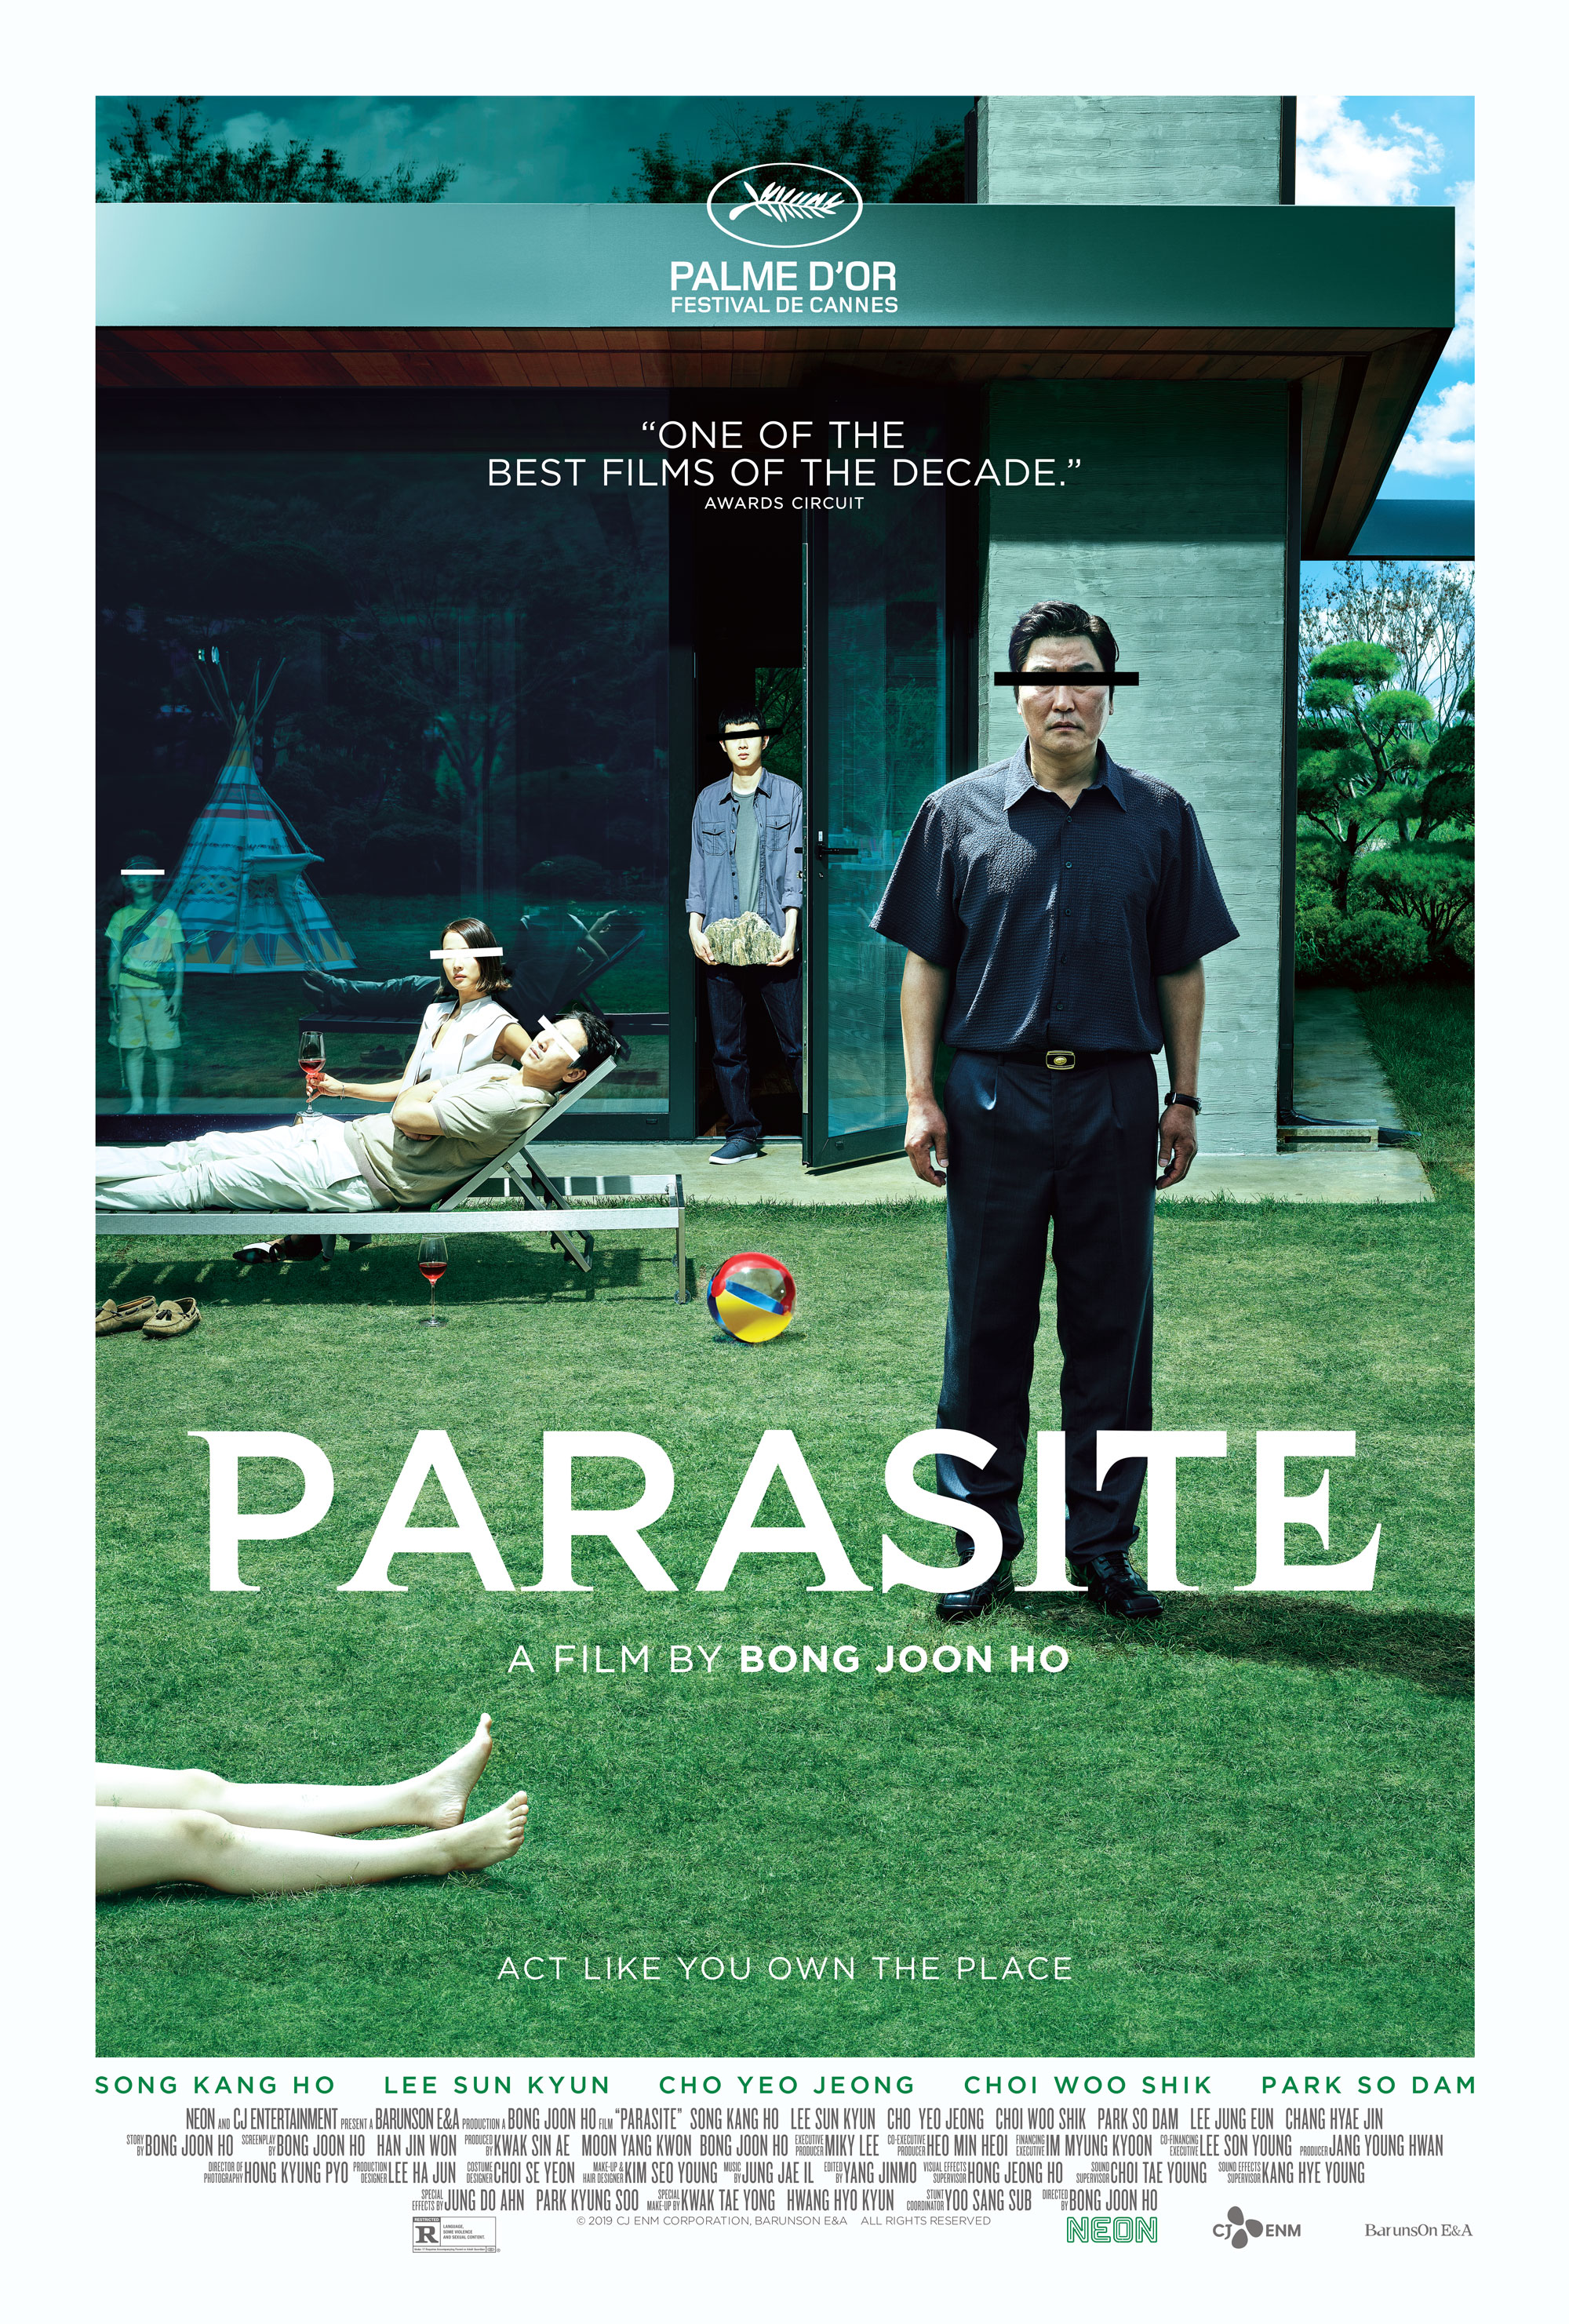 Poster for 'Parasite' (2019) directed by Bong Joon Ho